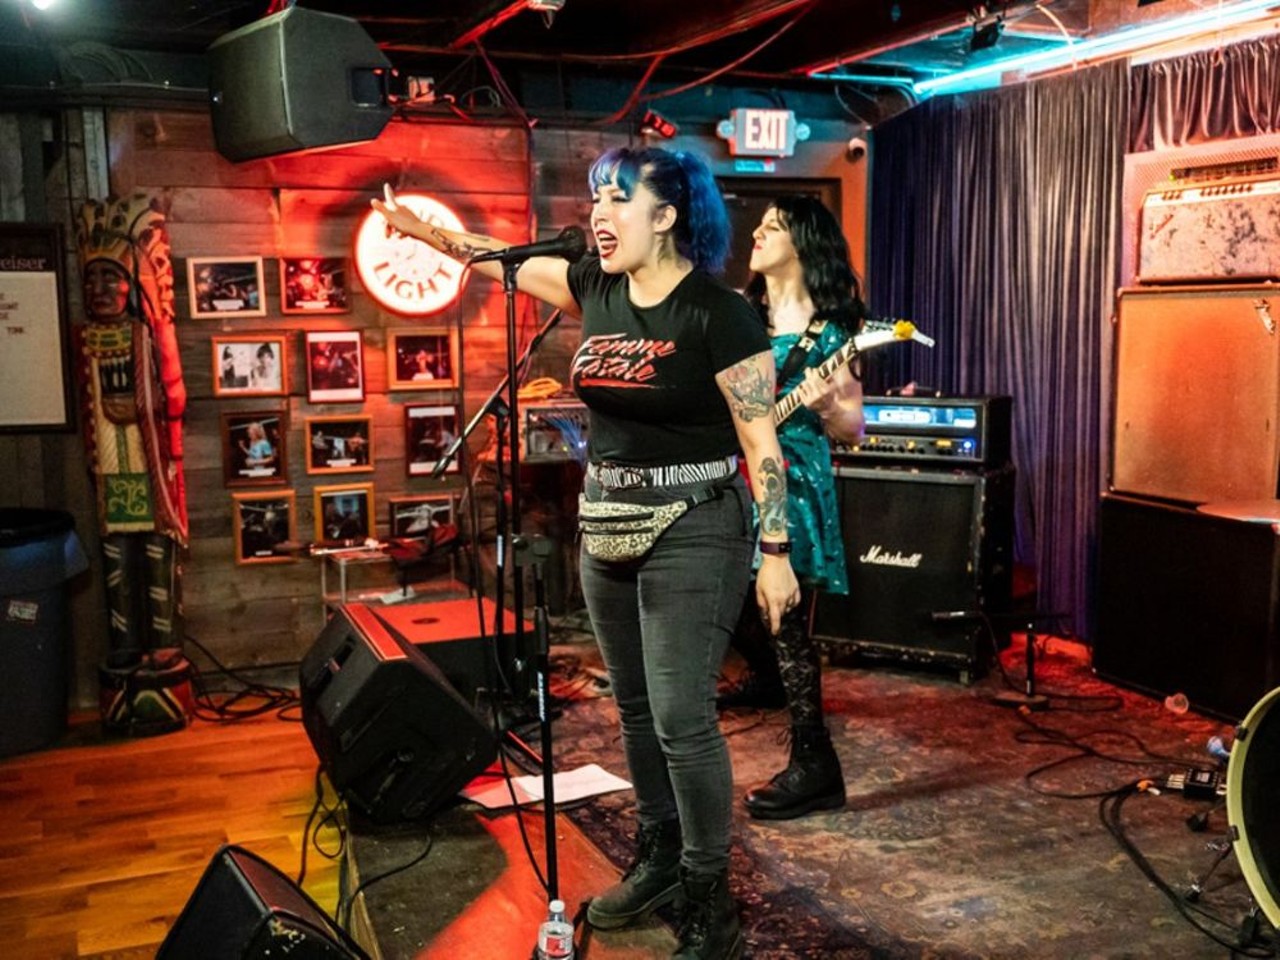 Check out the local live music scene
Sometimes you just gotta rock it out. Venues like Faust, The Lonesome Rose, 502 Bar, Hi-Tones and many more often host shows that start at 9 p.m. or later, keeping the fun going all night long.